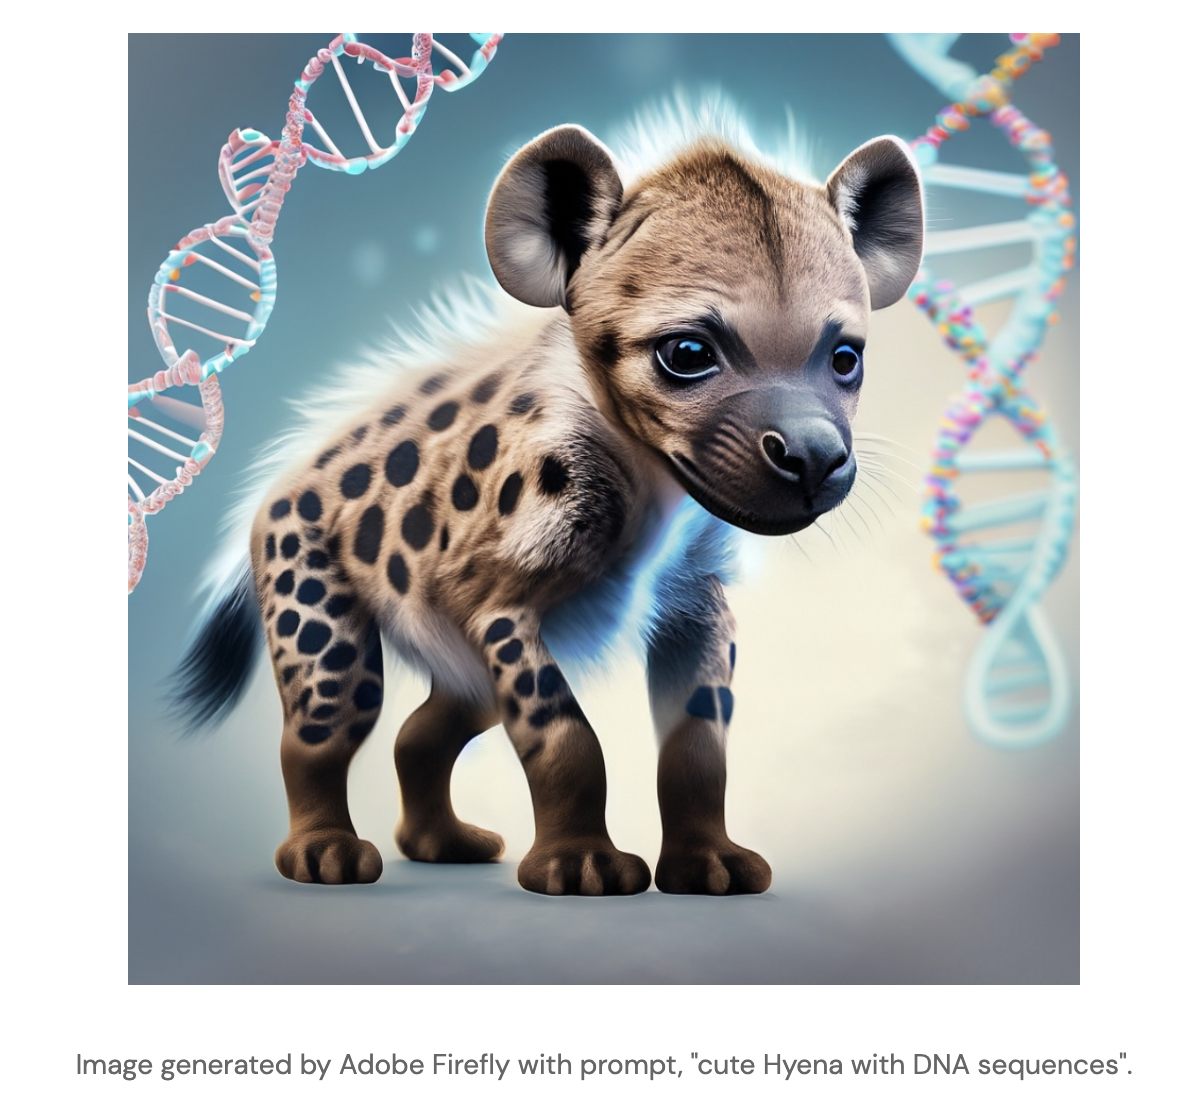 Stanford Researchers Introduce HyenaDNA: A Long-Range Genomic Foundation Model with Context Lengths of up to 1 Million Tokens at Single Nucleotide Resolution